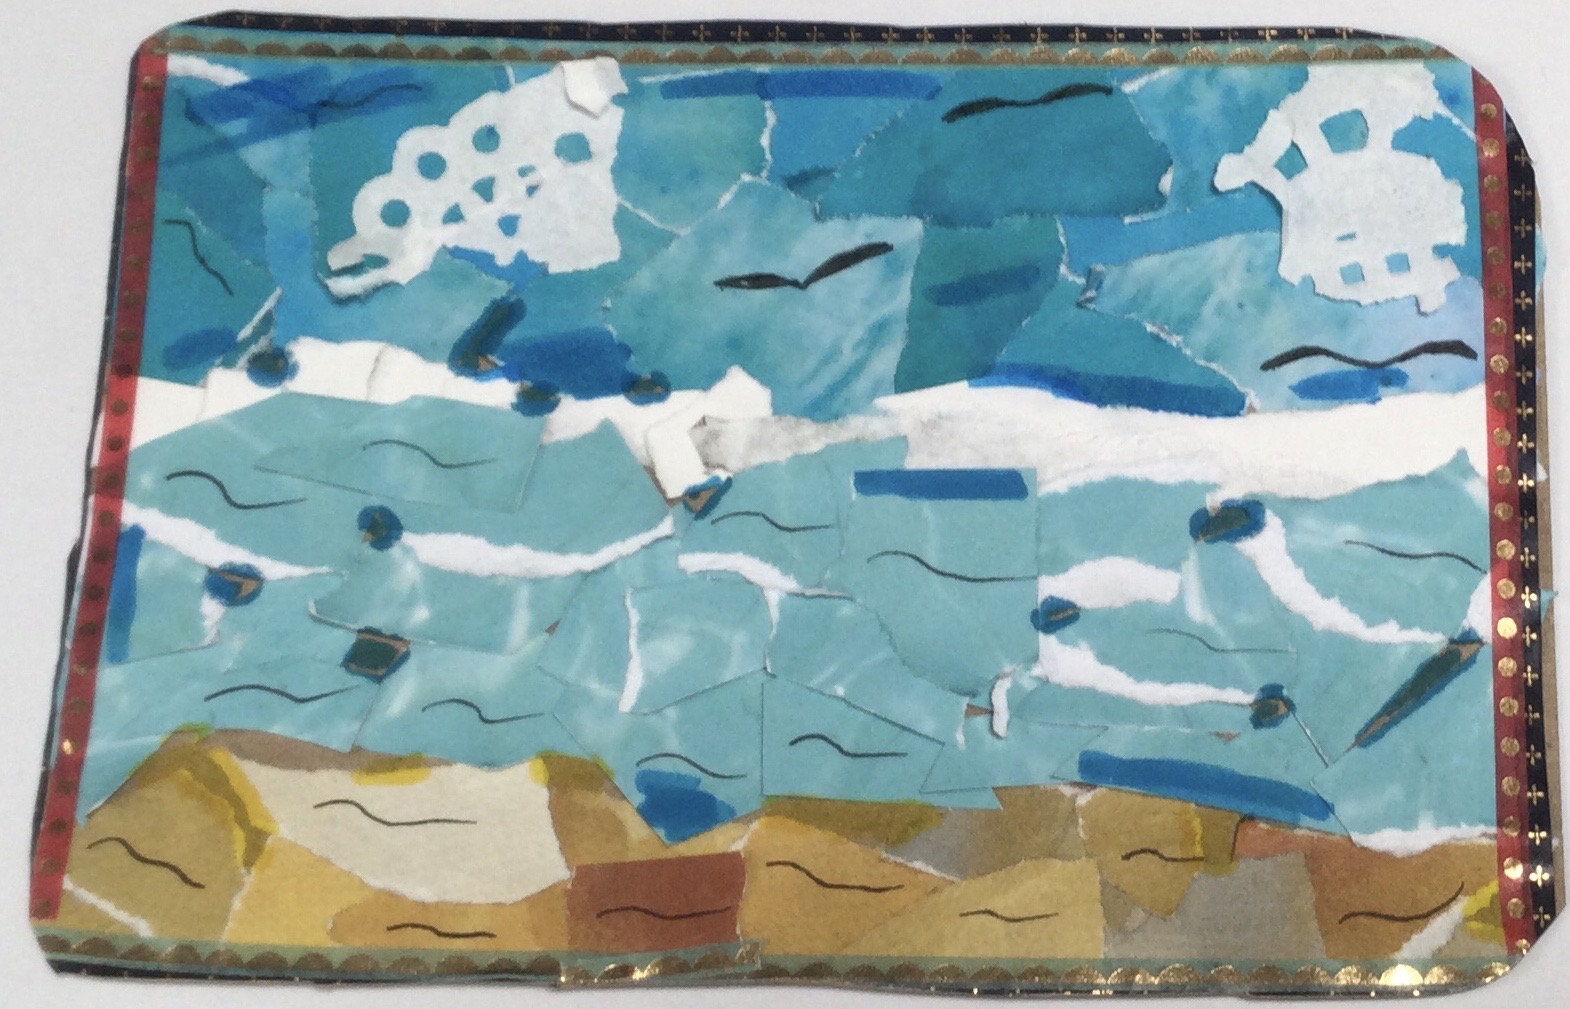 A collaged postcard with an image of sea and sky created with lots of tiny bits of blue paper, details picked out with hand-drawn lines in black and blue. Scraps of yellow and gold paper create a beach effect along the bottom of the card and the whole is bordered in thin tapes of dark blue, red and gold